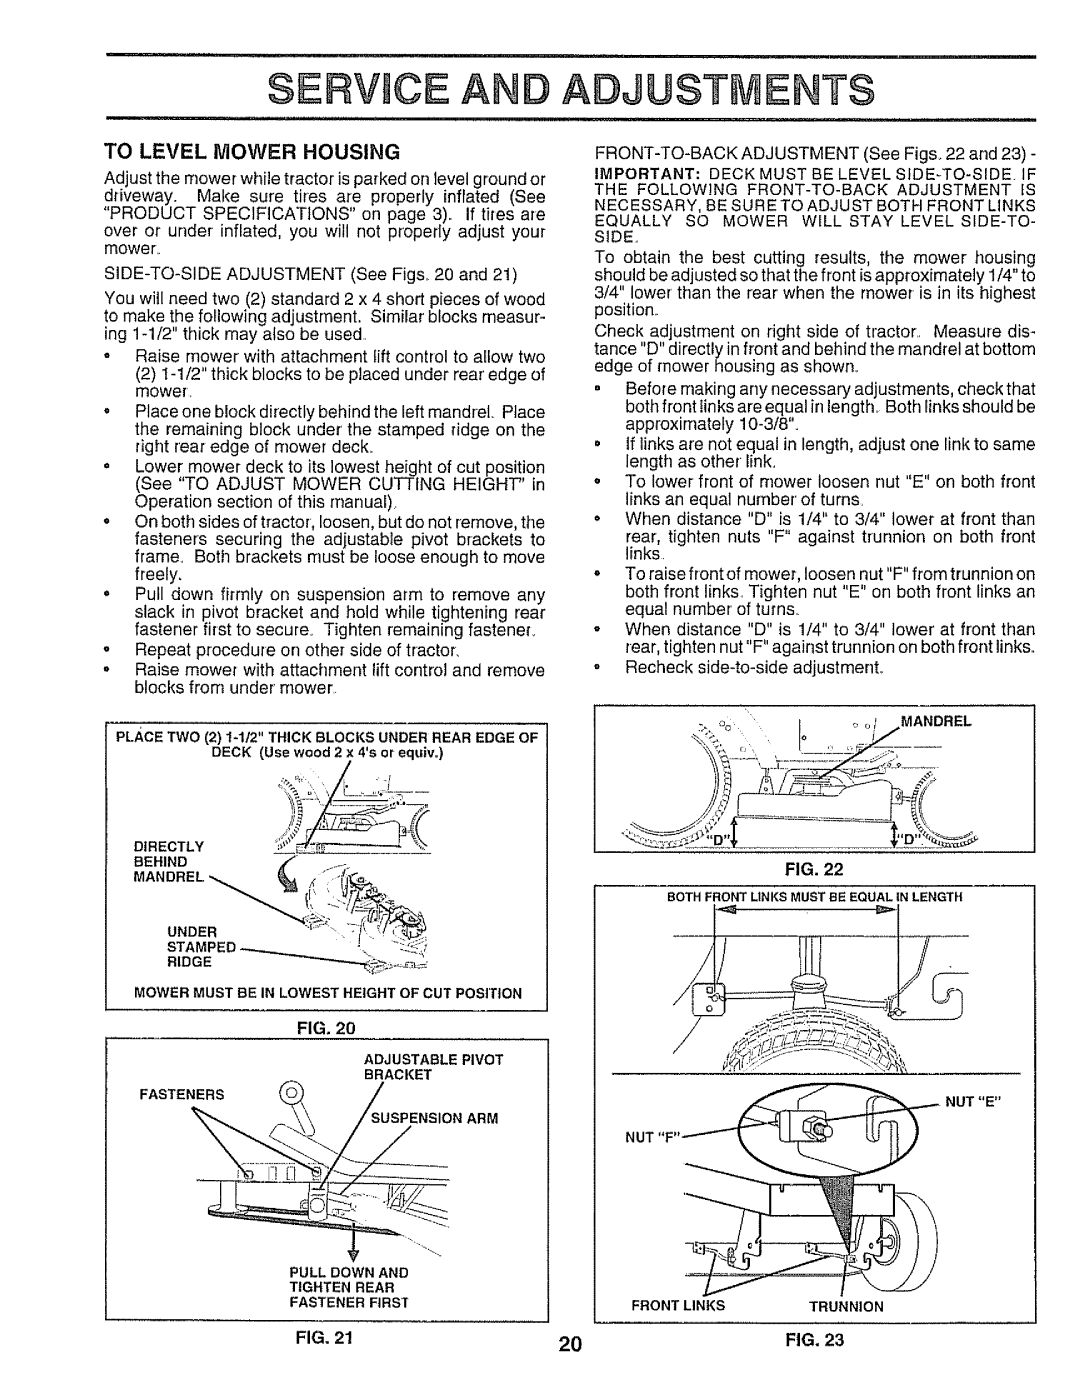 Sears 917.25545 owner manual B,l,,ID d, To Level Mower Housing, Service And Adjustments 